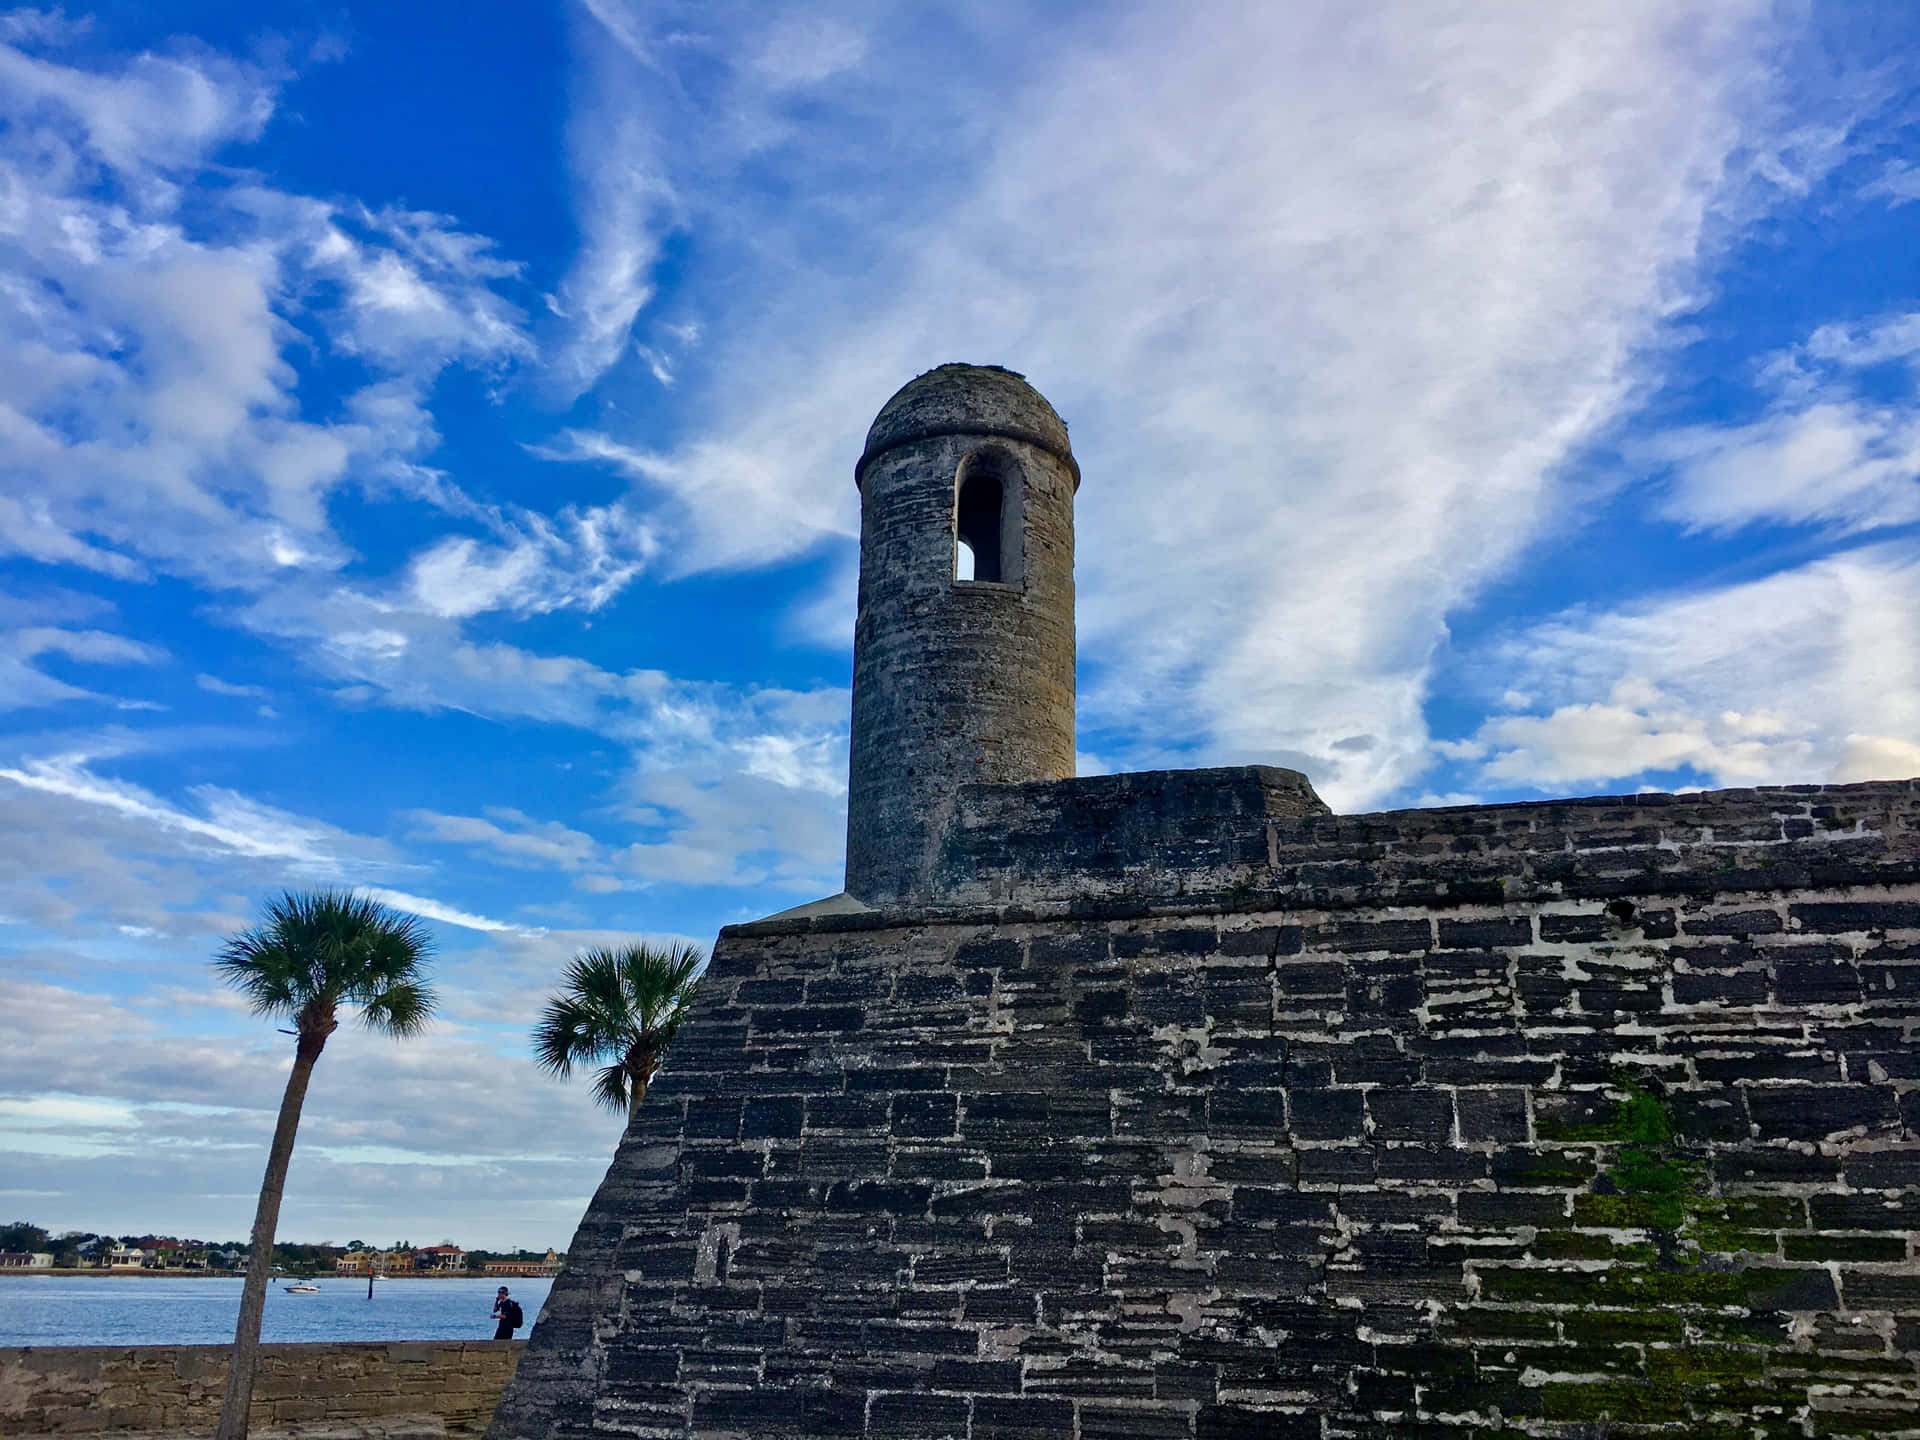 A Fortification Tower With A Clock Tower And Palm Trees